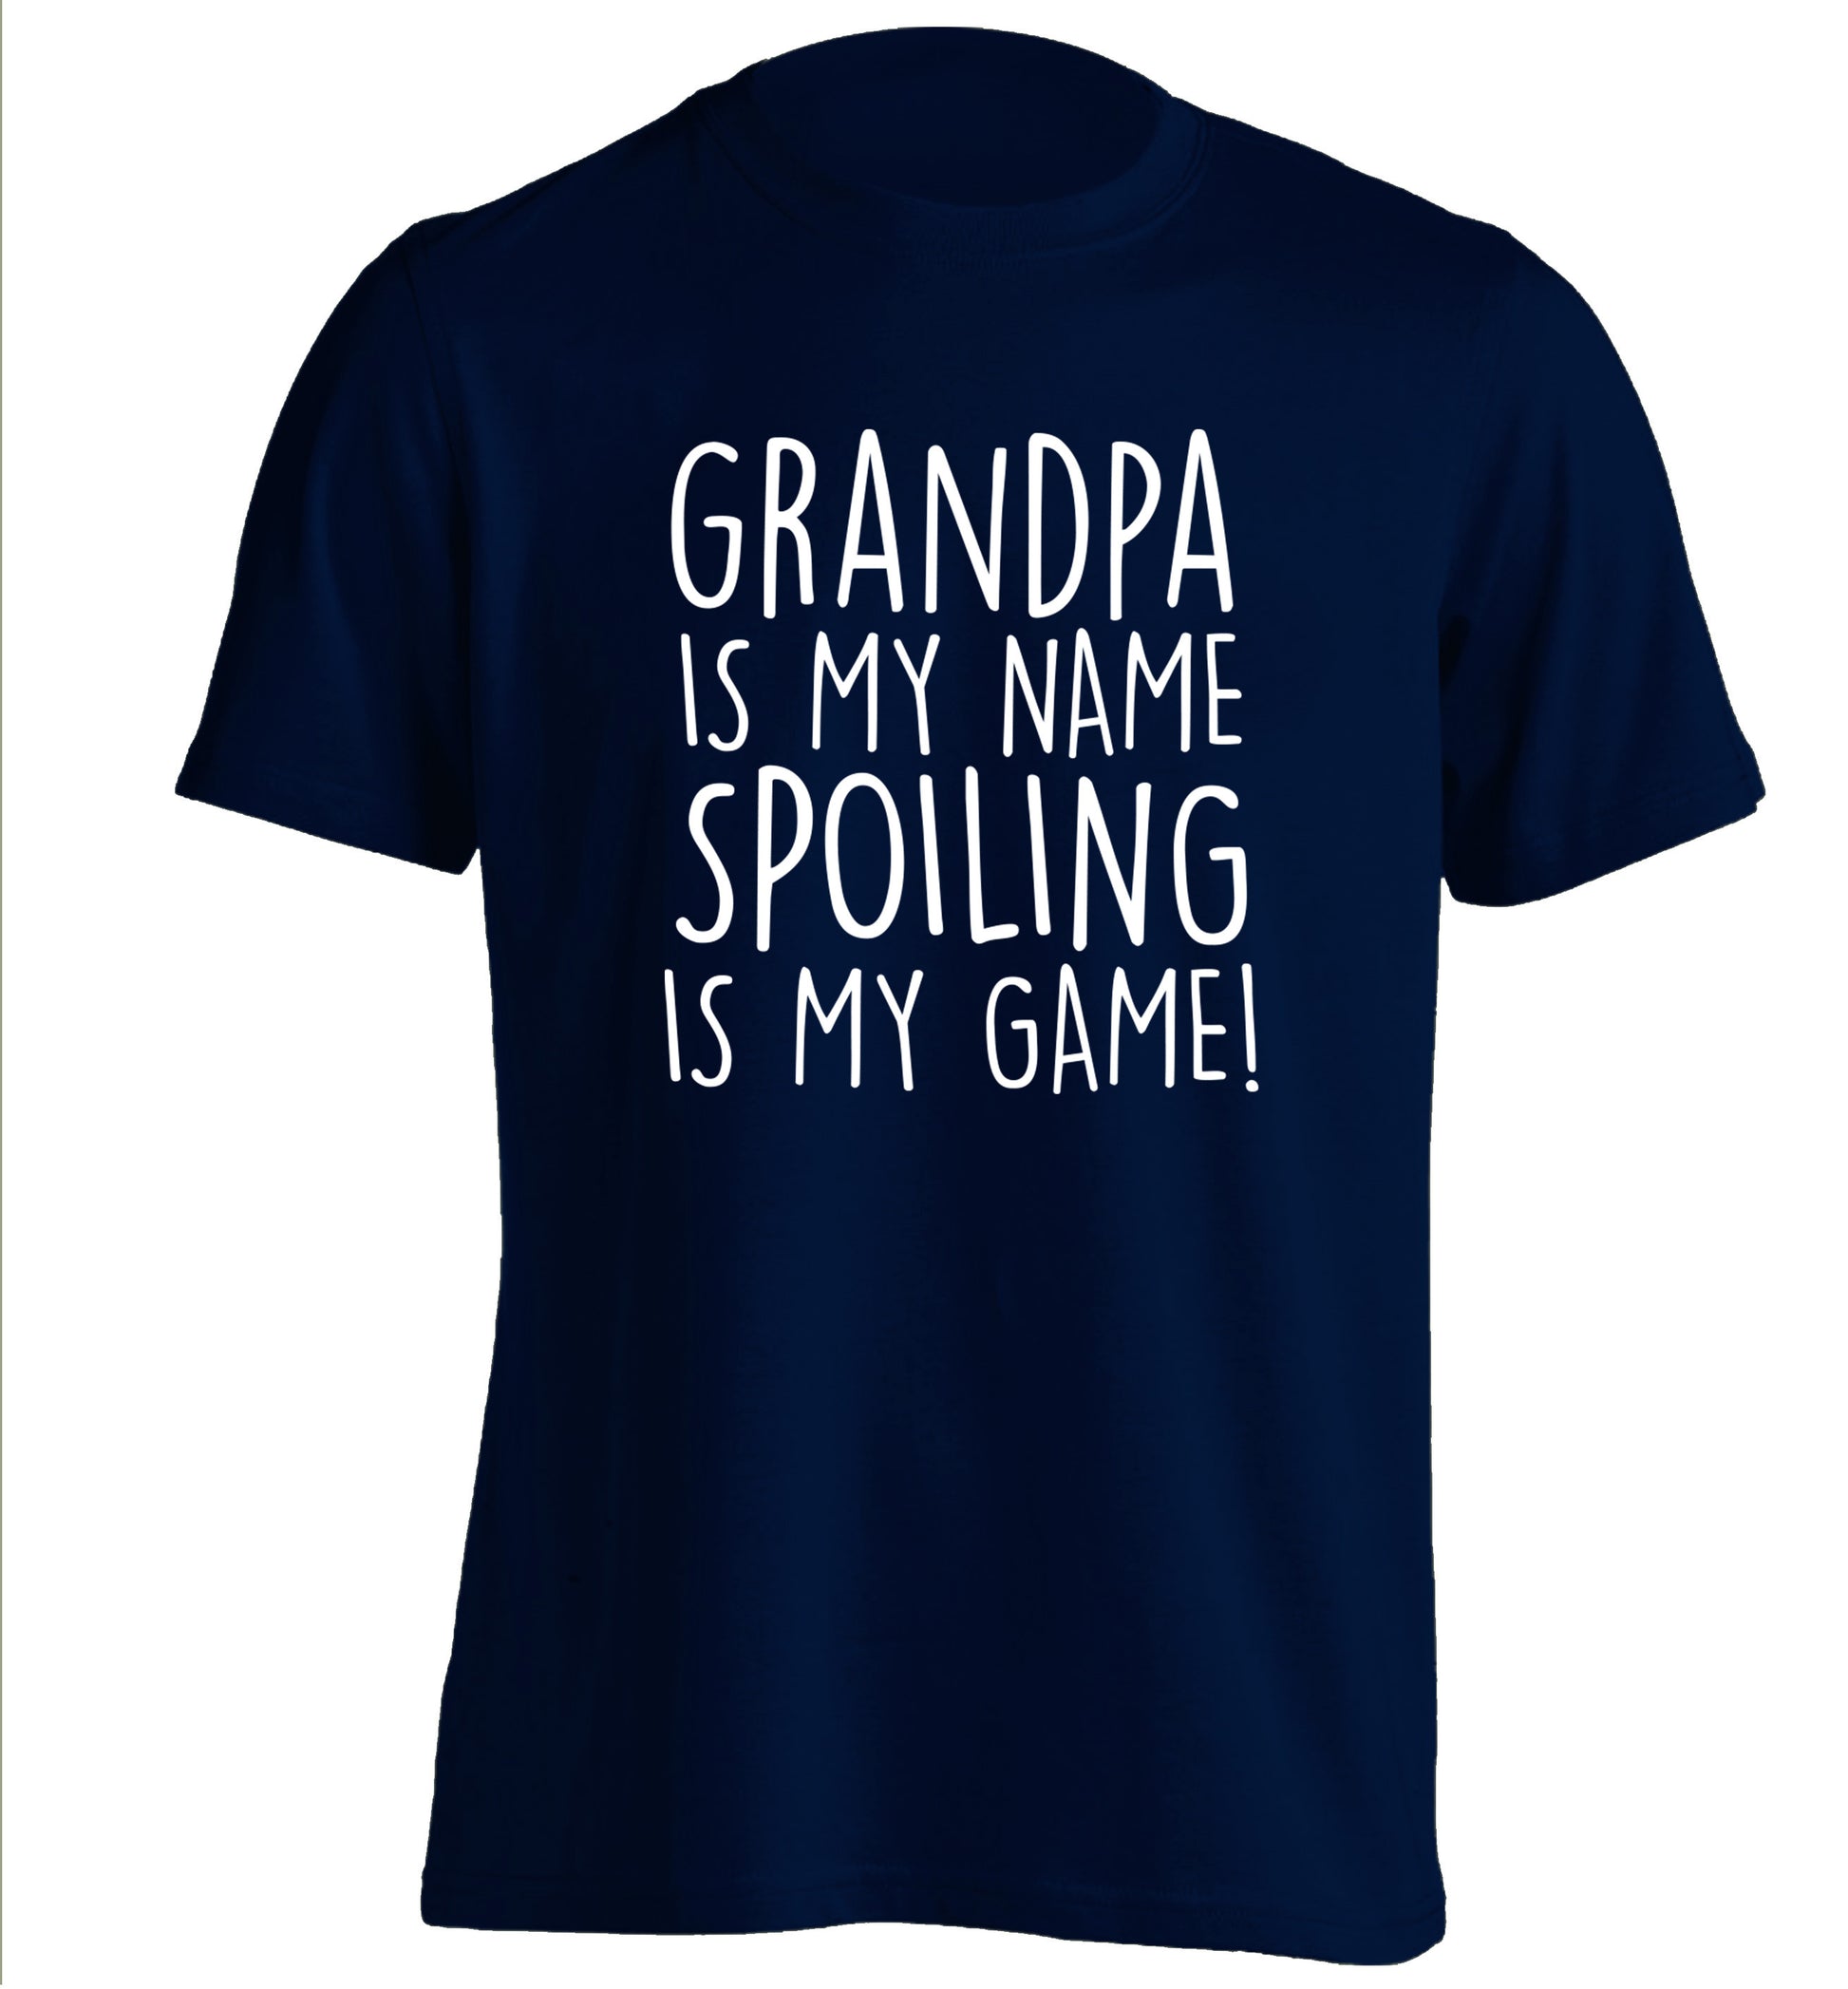 Grandpa is my name, spoiling is my game adults unisex navy Tshirt 2XL